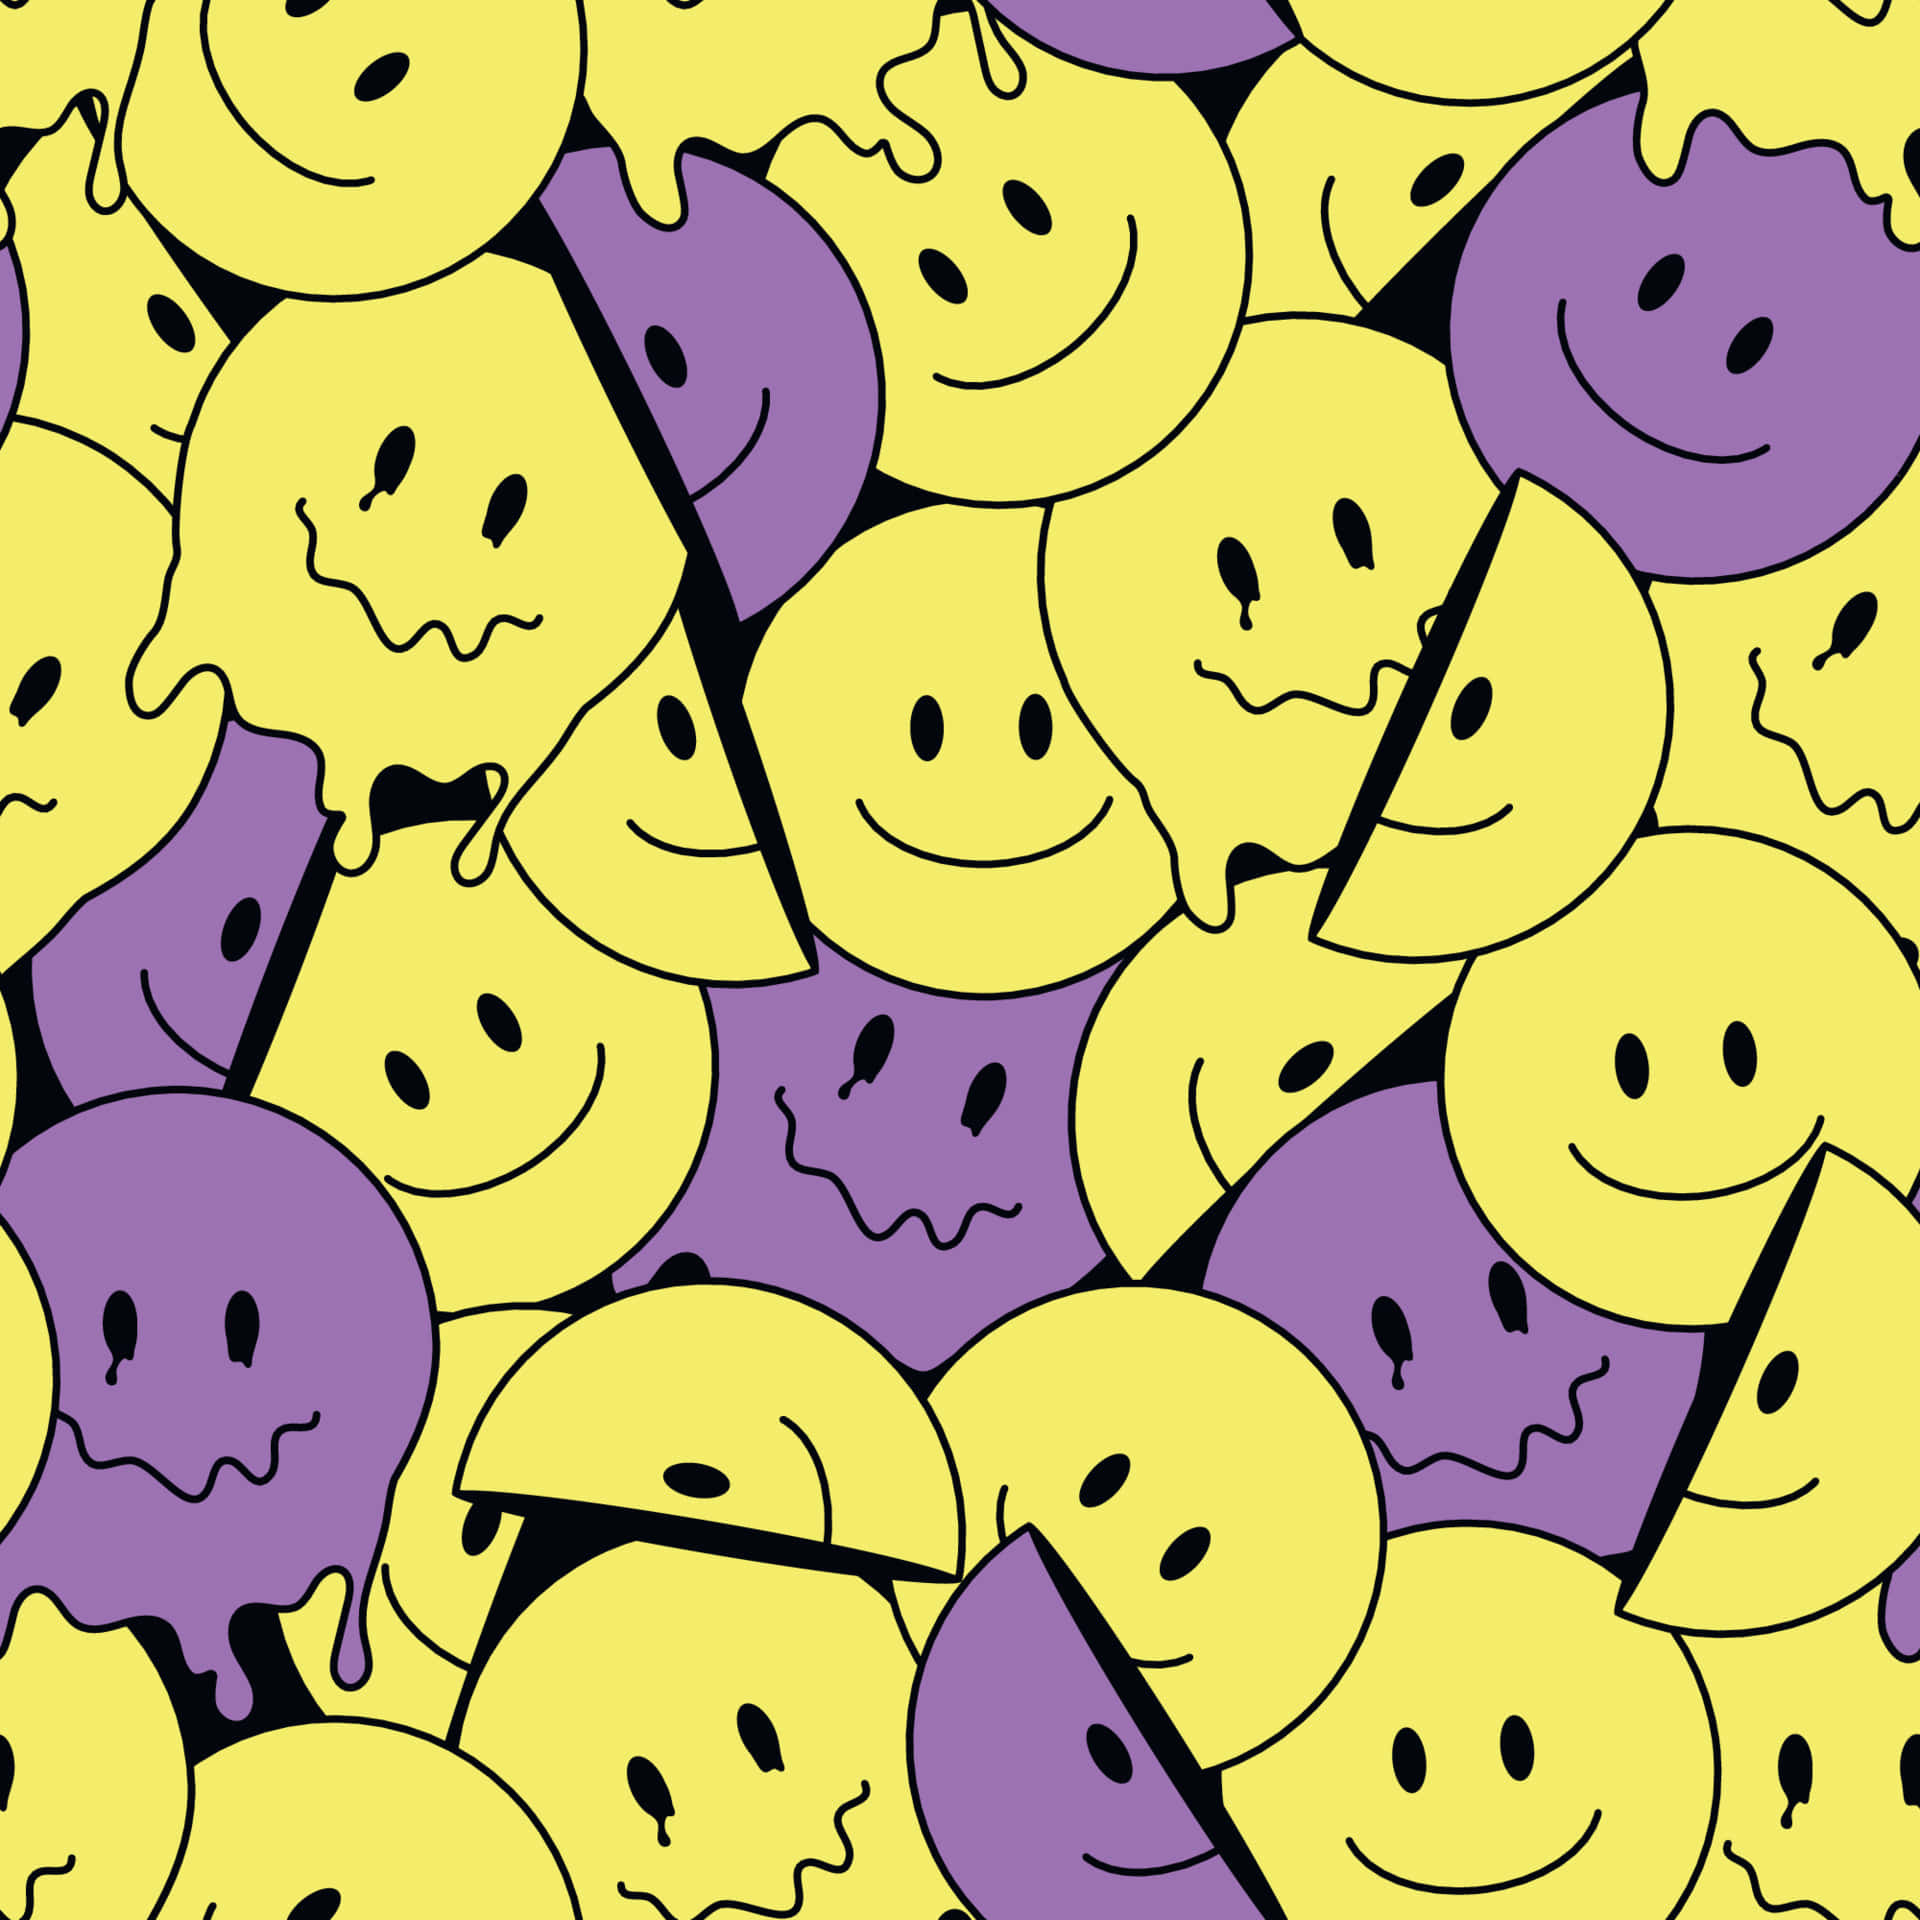 Purpleand Yellow Smiley Face Pattern Wallpaper